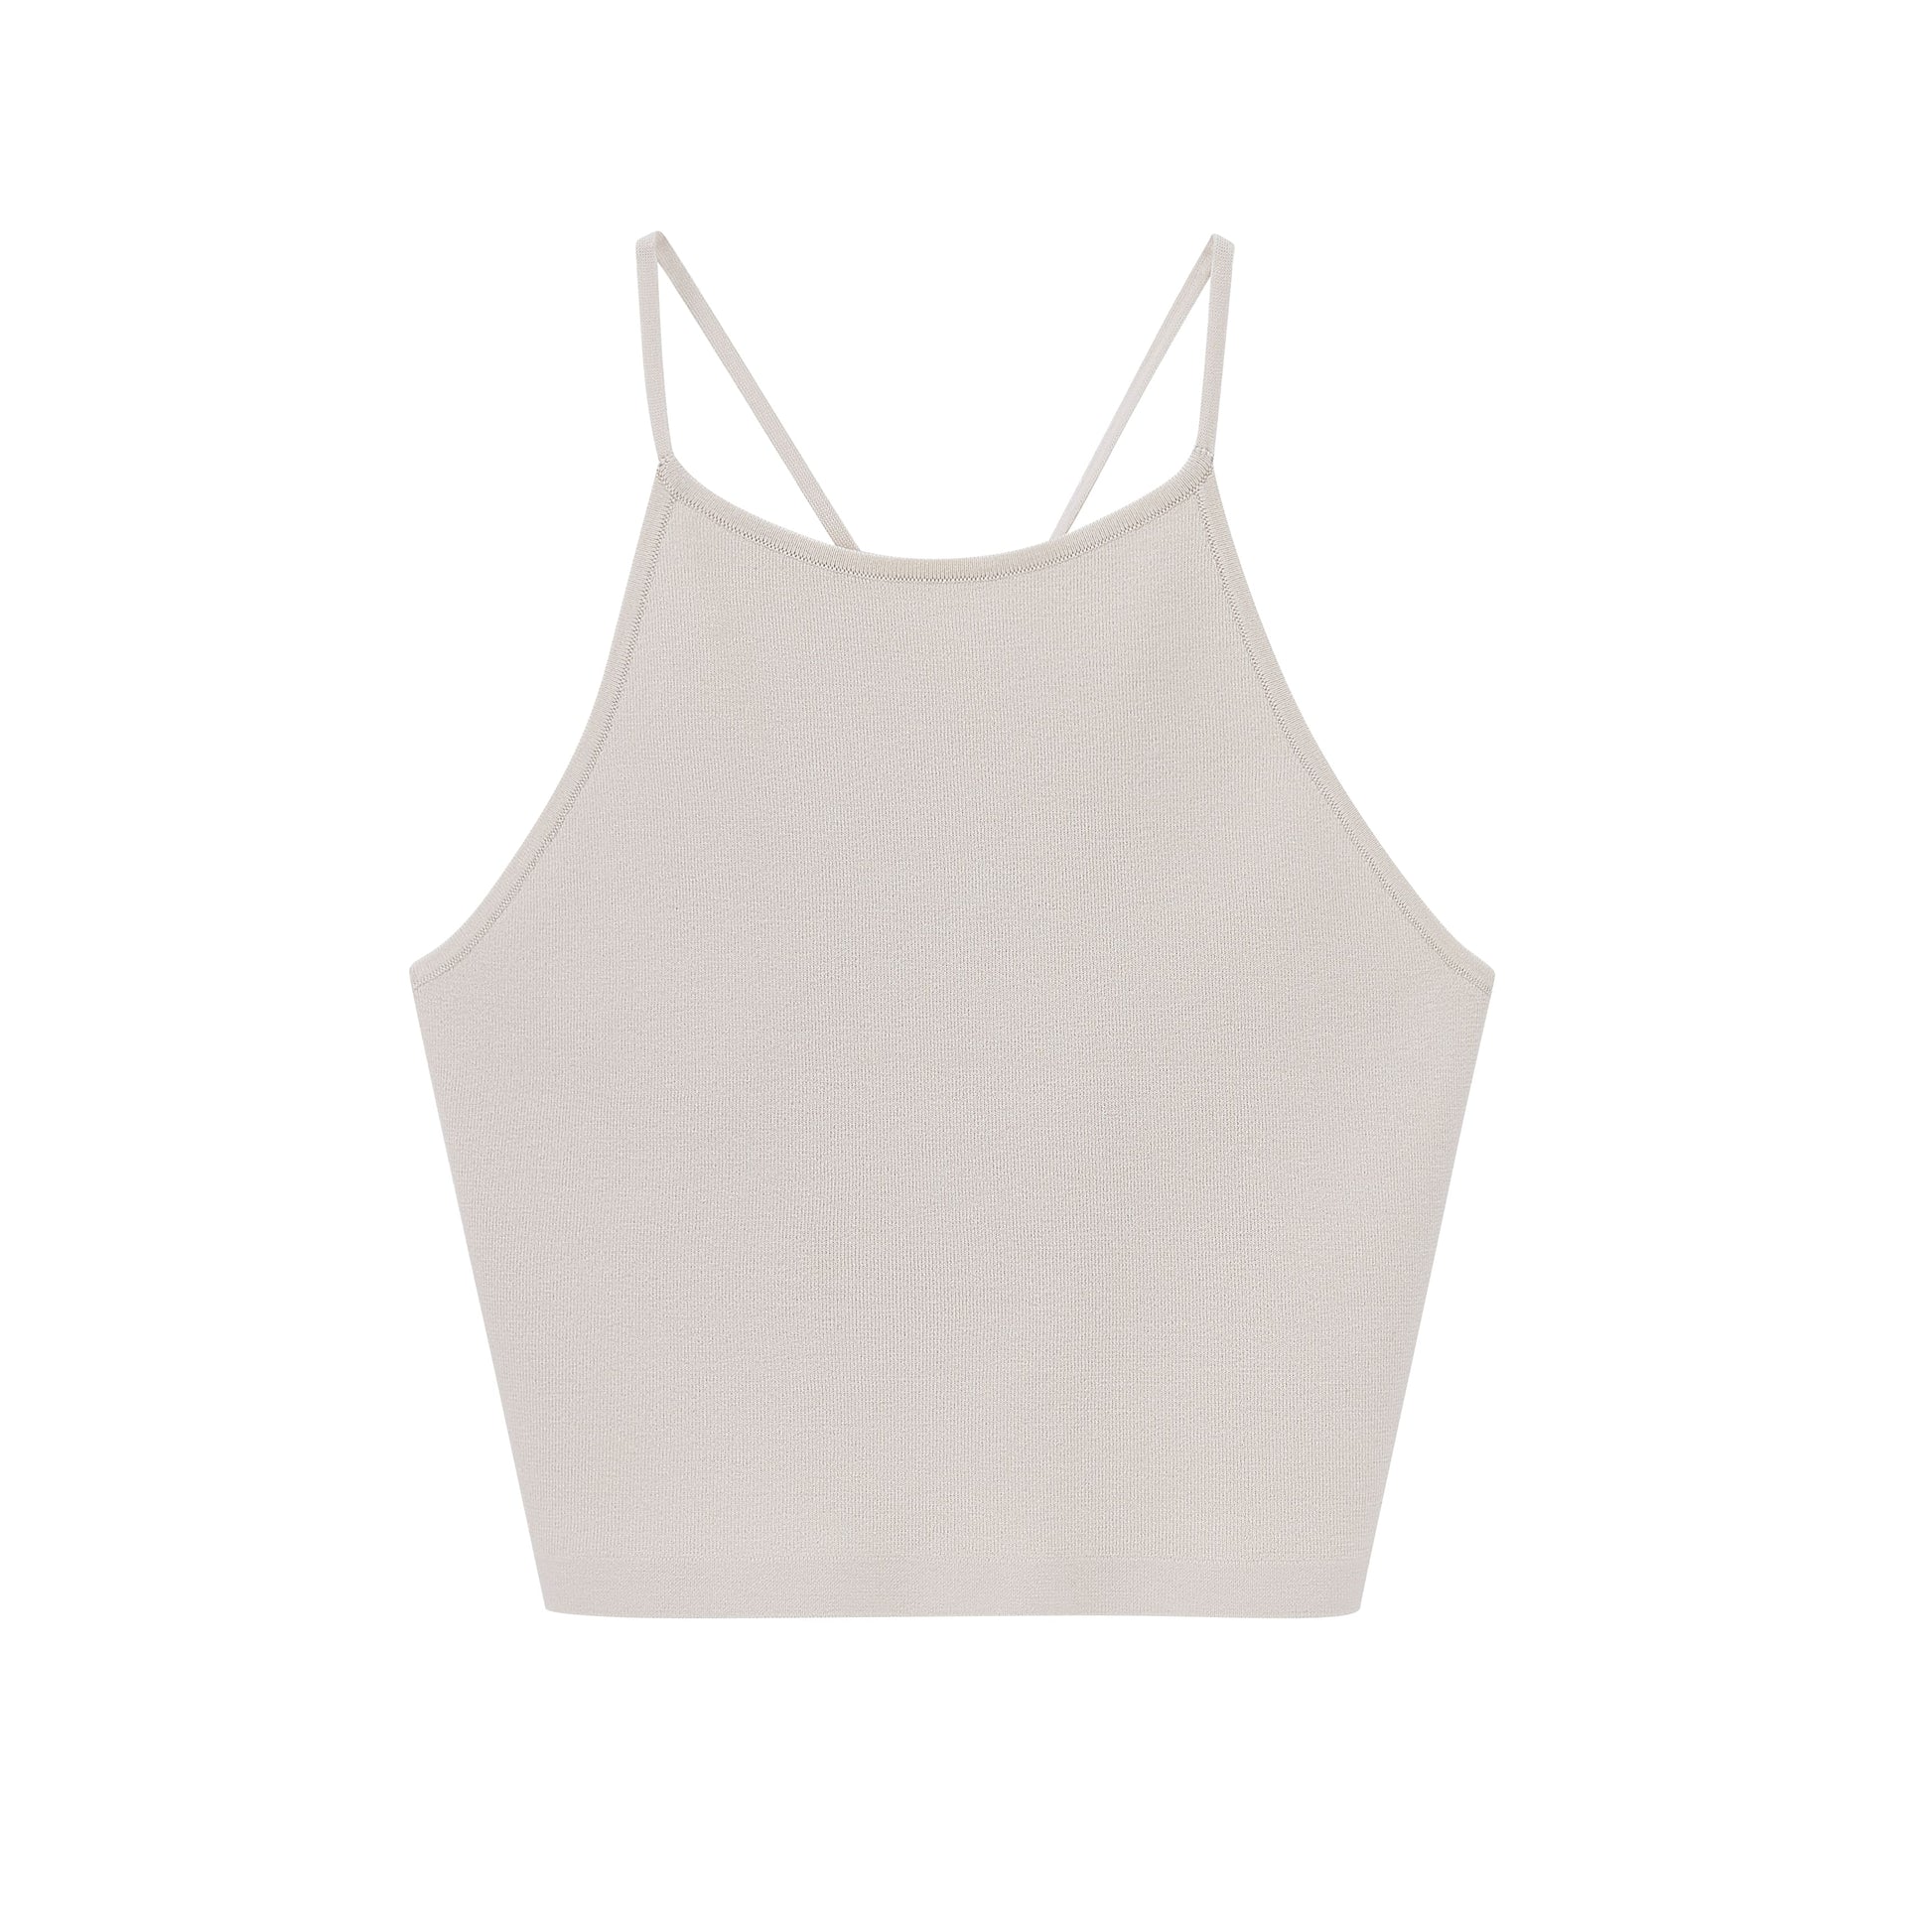 Flat lay image of front of beige-colored tank top